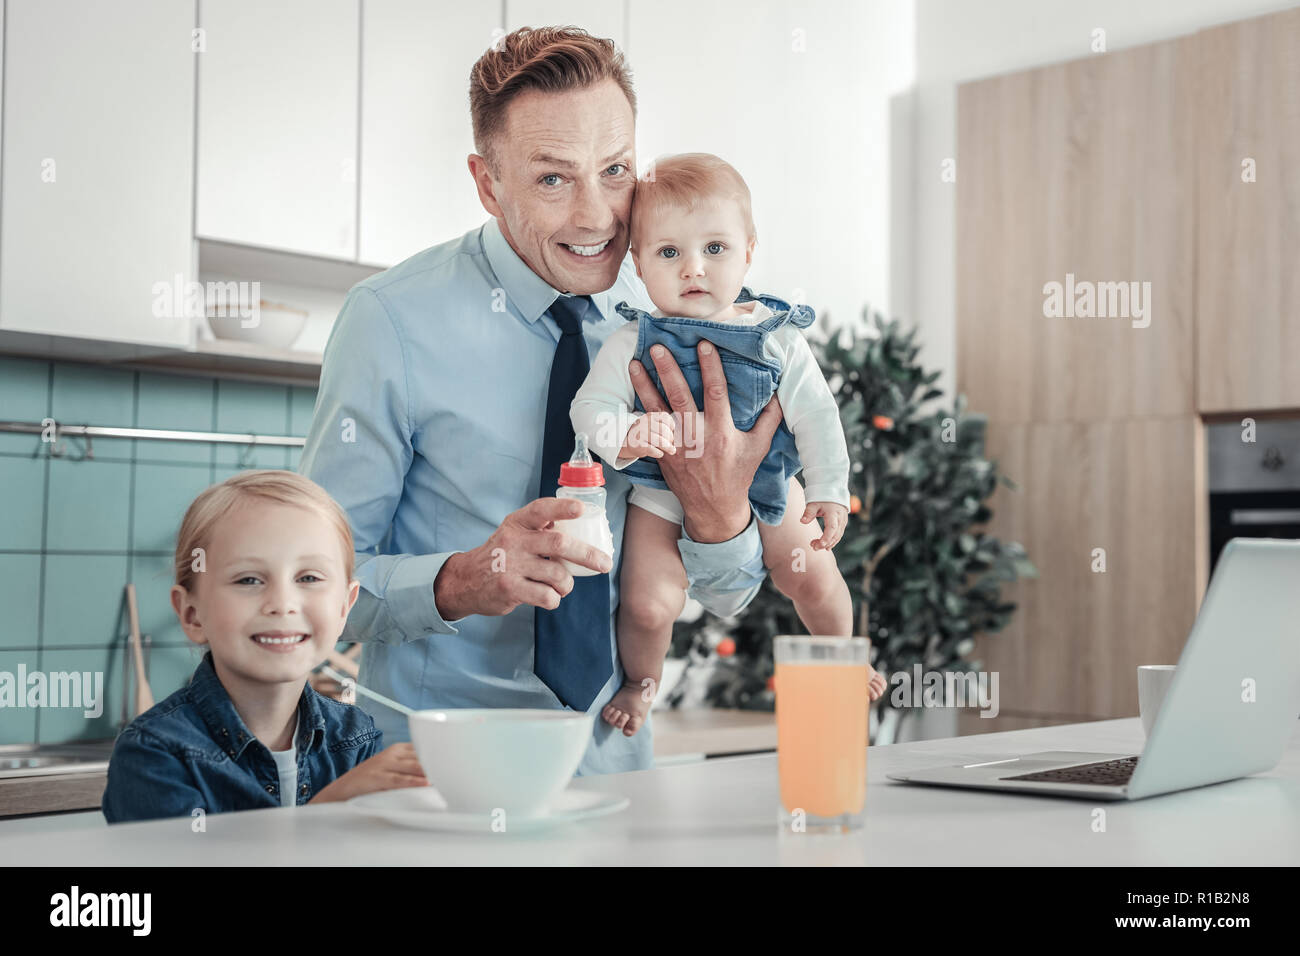 Satisfied handsome father smiling and spending time with children. Stock Photo